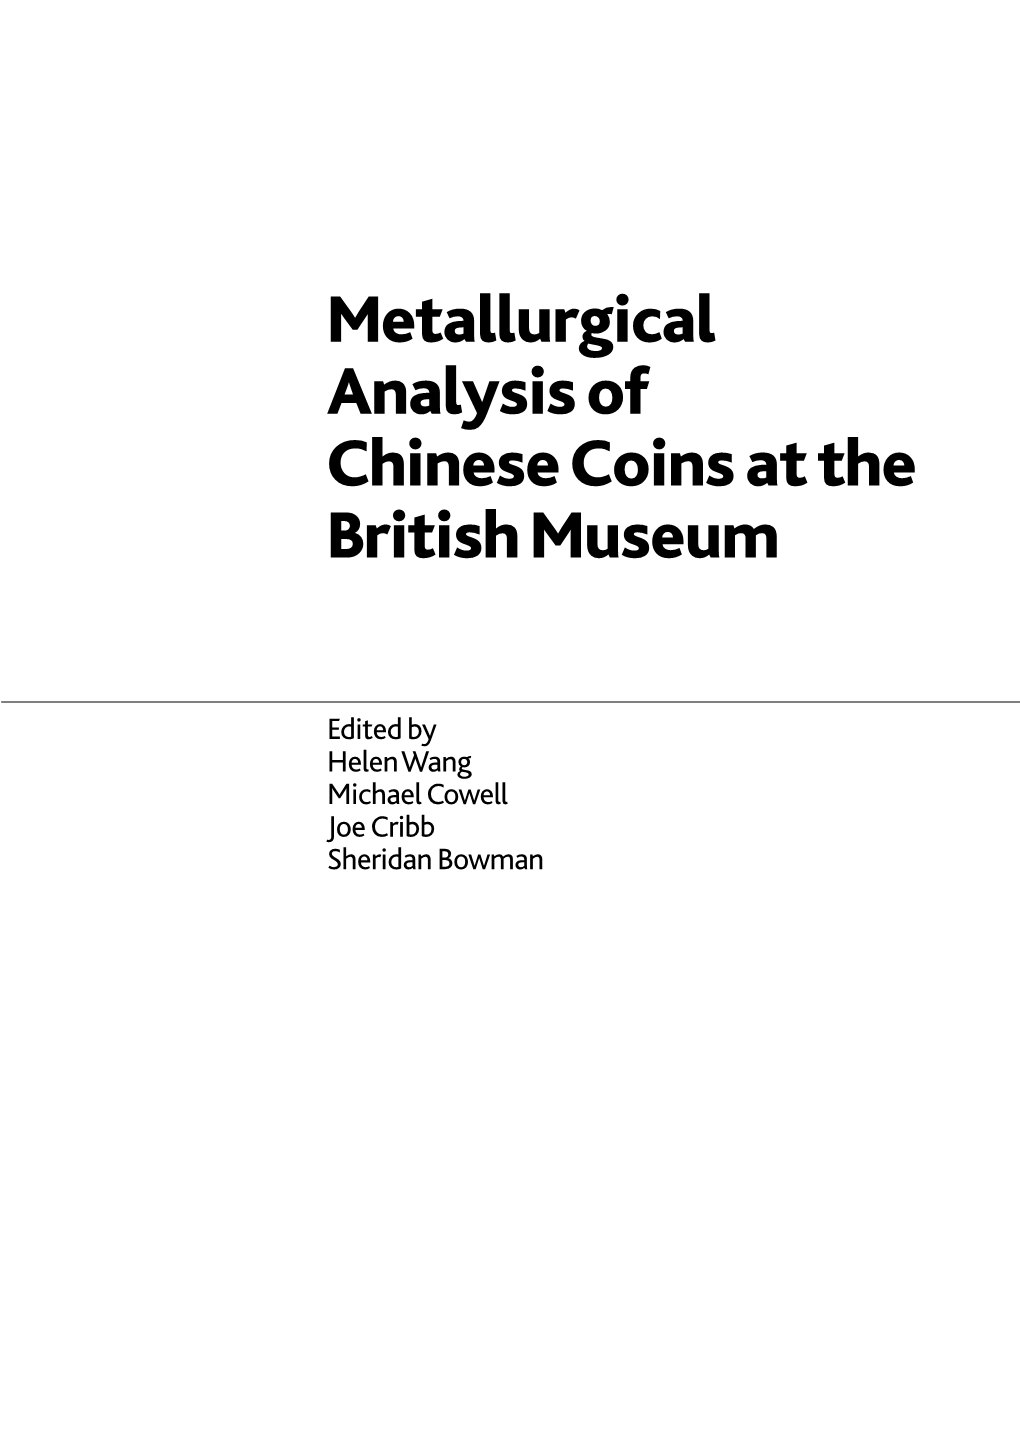 Metallurgical Analysis of Chinese Coins at the British Museum